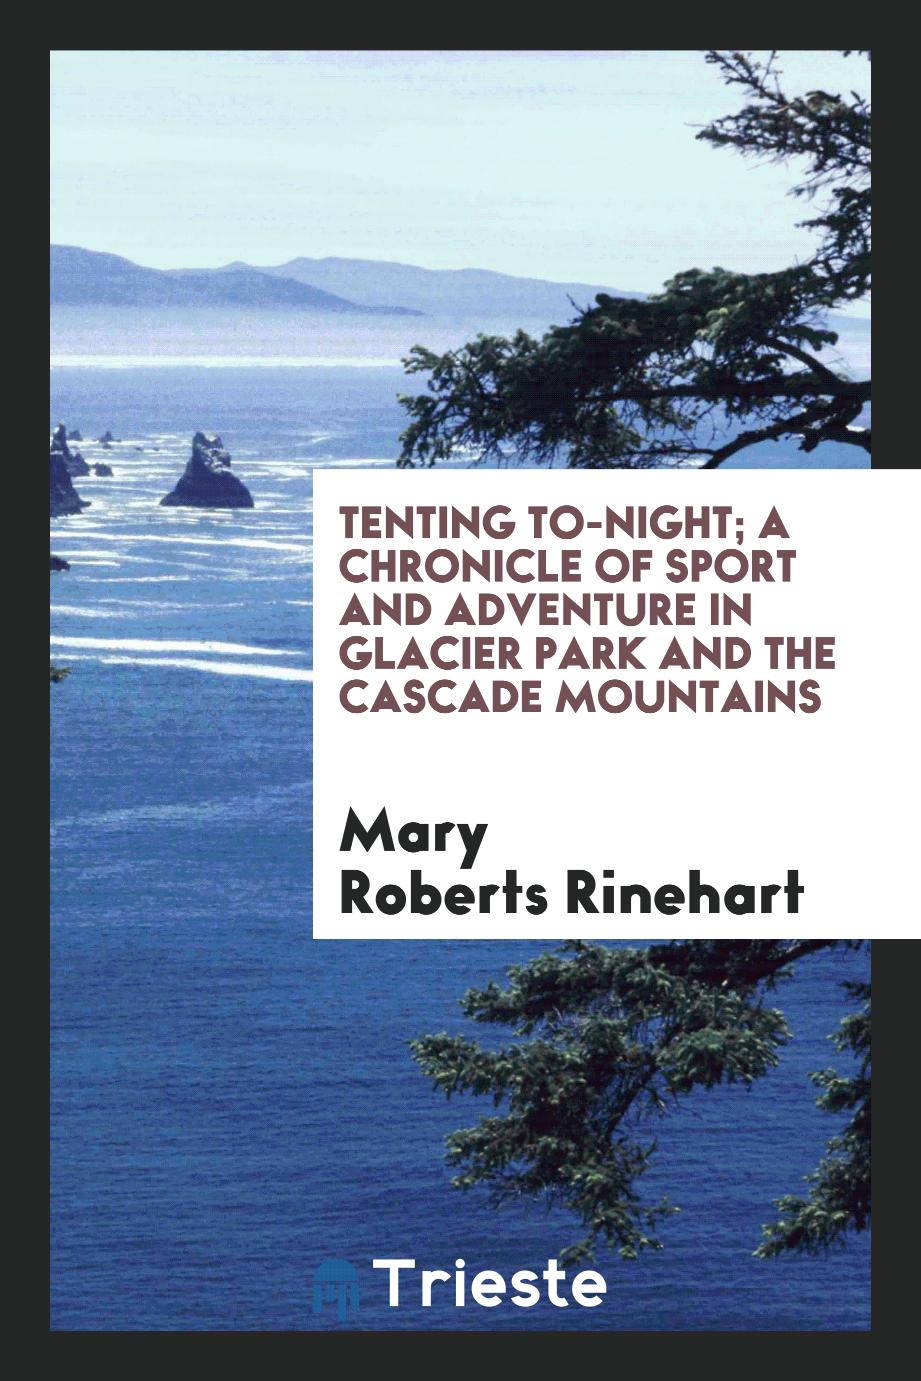 Tenting to-night; a chronicle of sport and adventure in Glacier park and the Cascade mountains